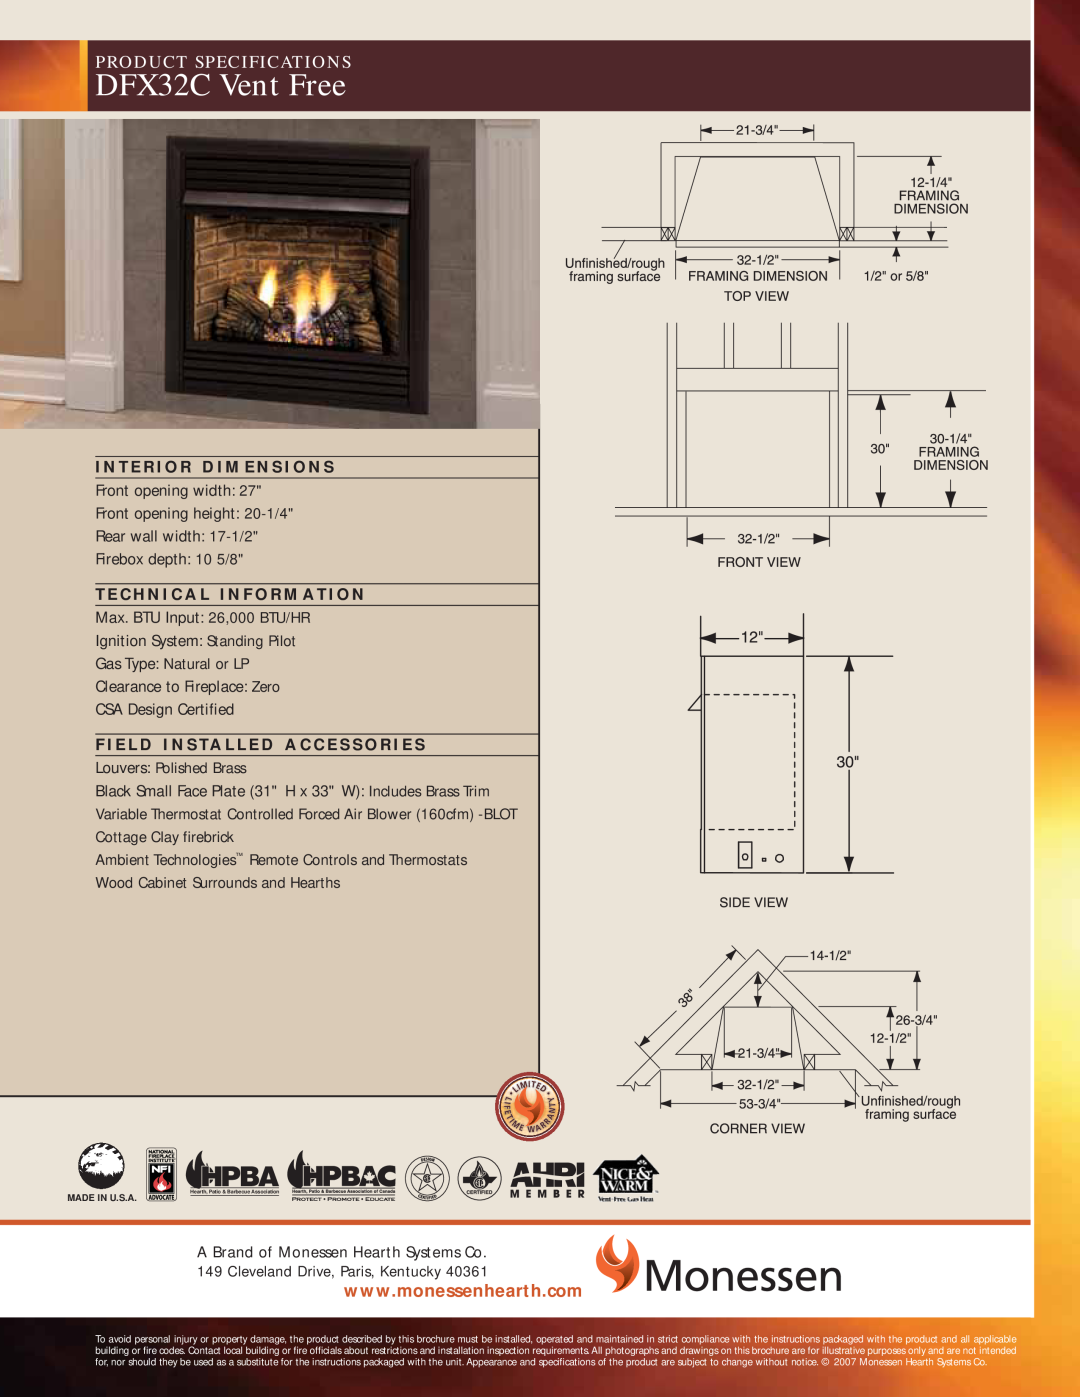 Monessen Hearth specifications DFX32C Vent Free, Product Specifications, Rear wall width 17-1/2 Firebox depth 10 5/8 